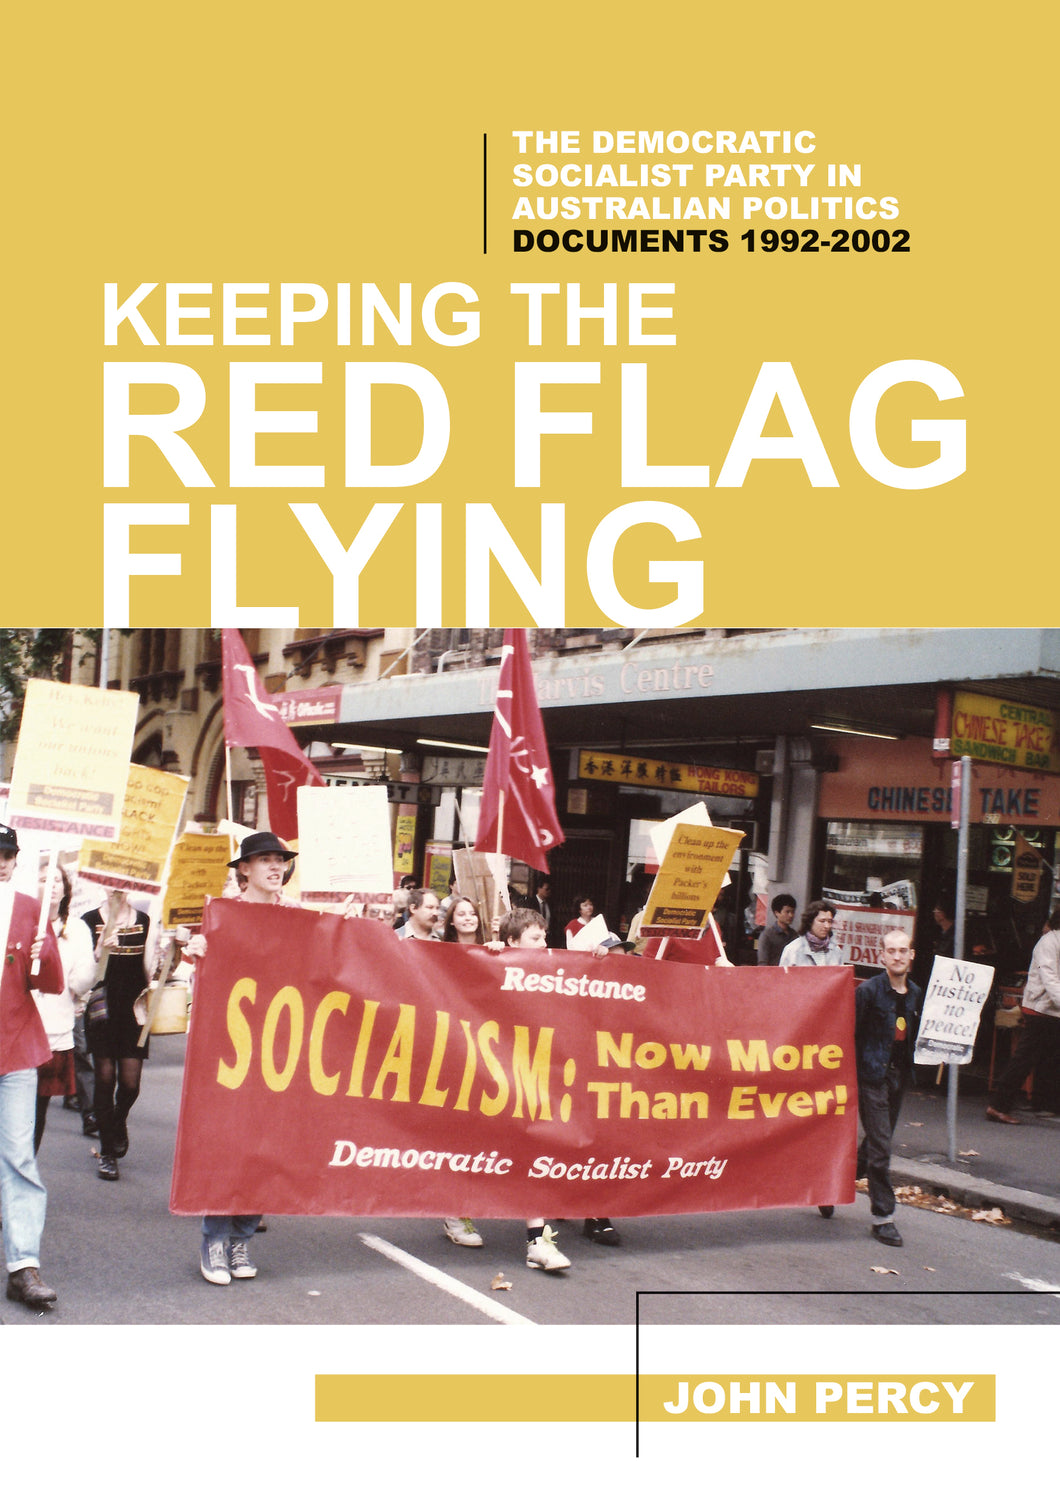 Keeping the Red Flag Flying - The Democratic Socialist Party in Australian Politics: Documents, 1992-2002